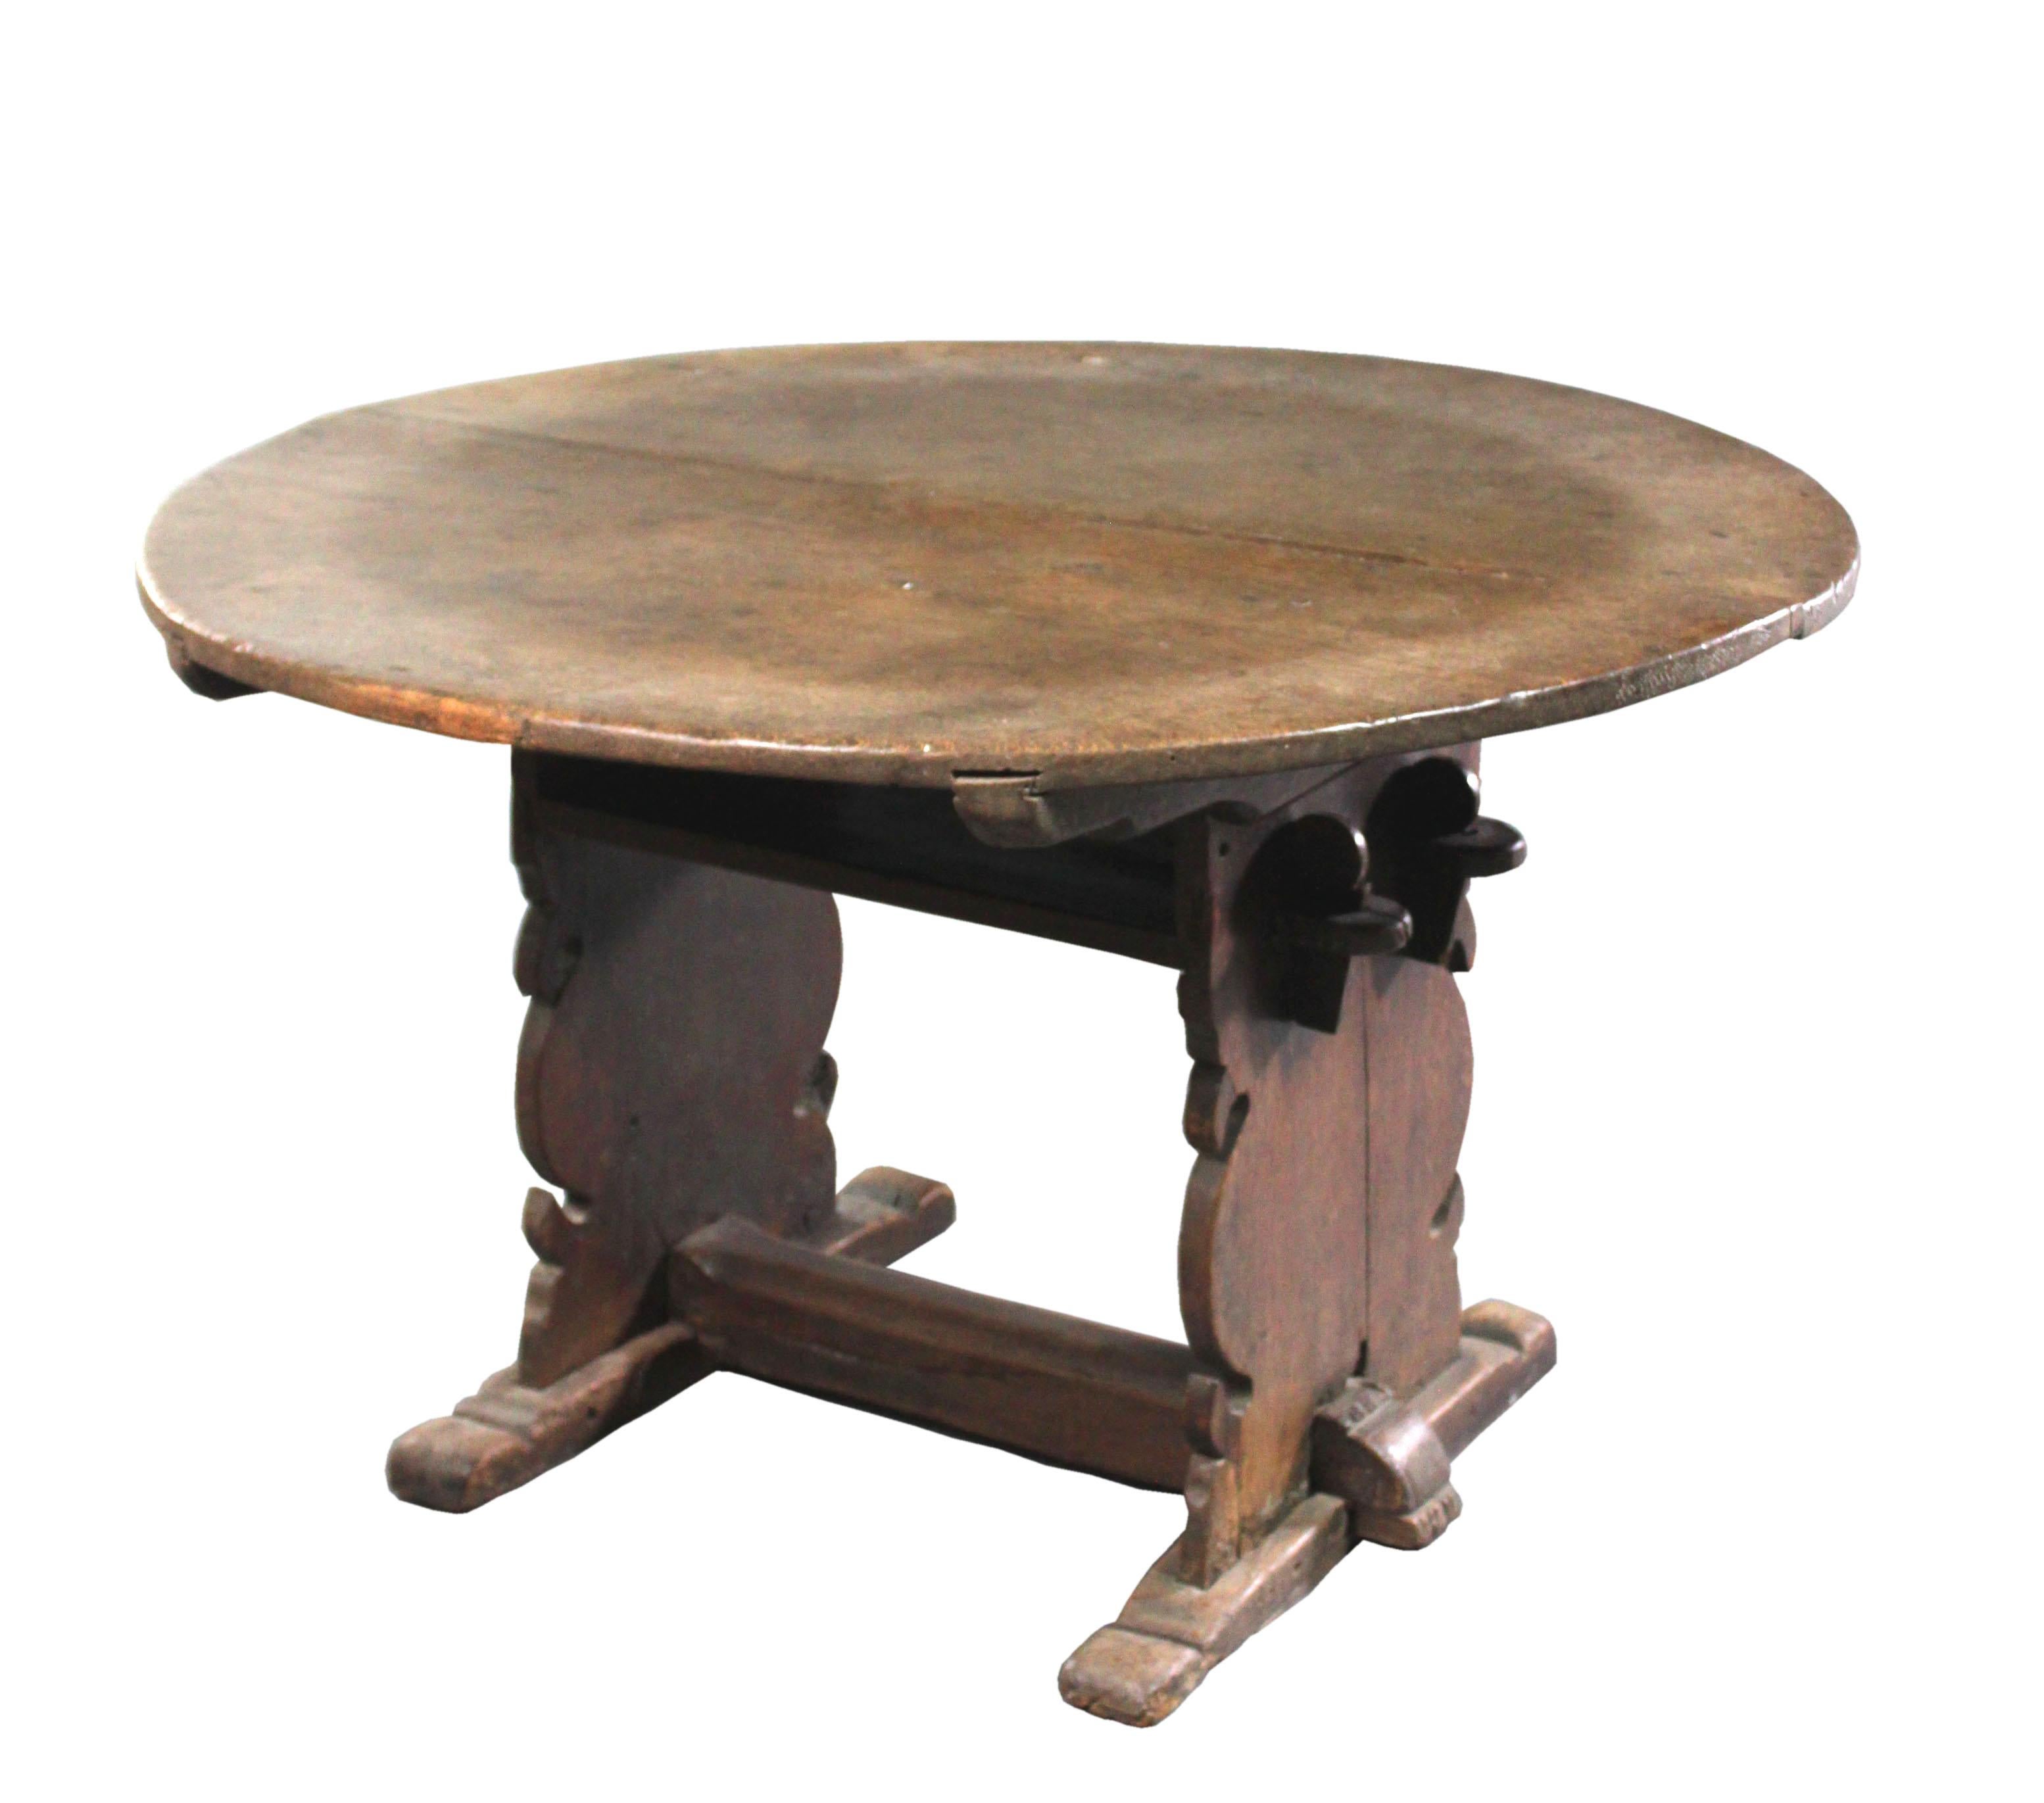 16th Century German oak monk's bench / centre table
Rare 16th Century German oak monk's bench / centre table, the near circular twin boarded top with underside locators pegged to shaped trestle ends; high boarded undershelf becomes a seat; sledge